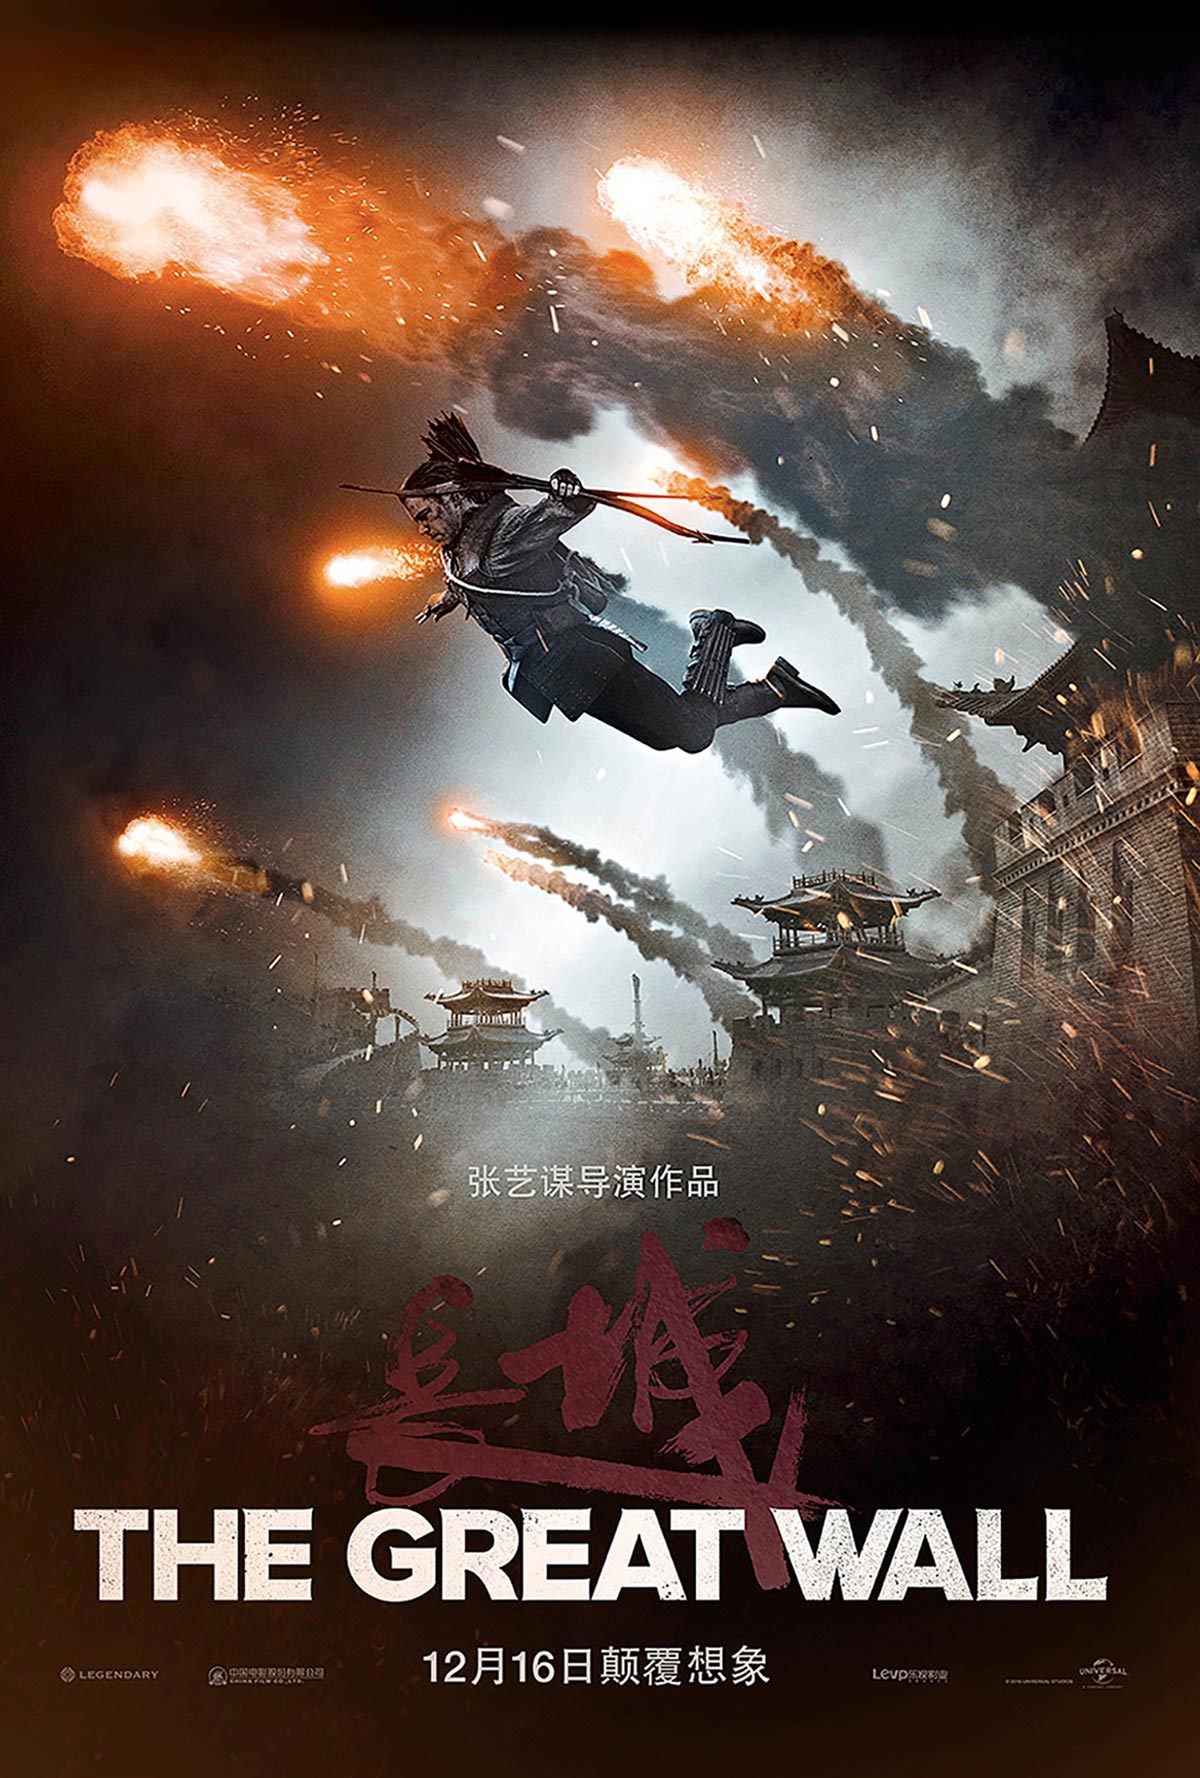 060_dreamogram-iconisus-key-art-movie-poster-the-great-wall_vertical-cover